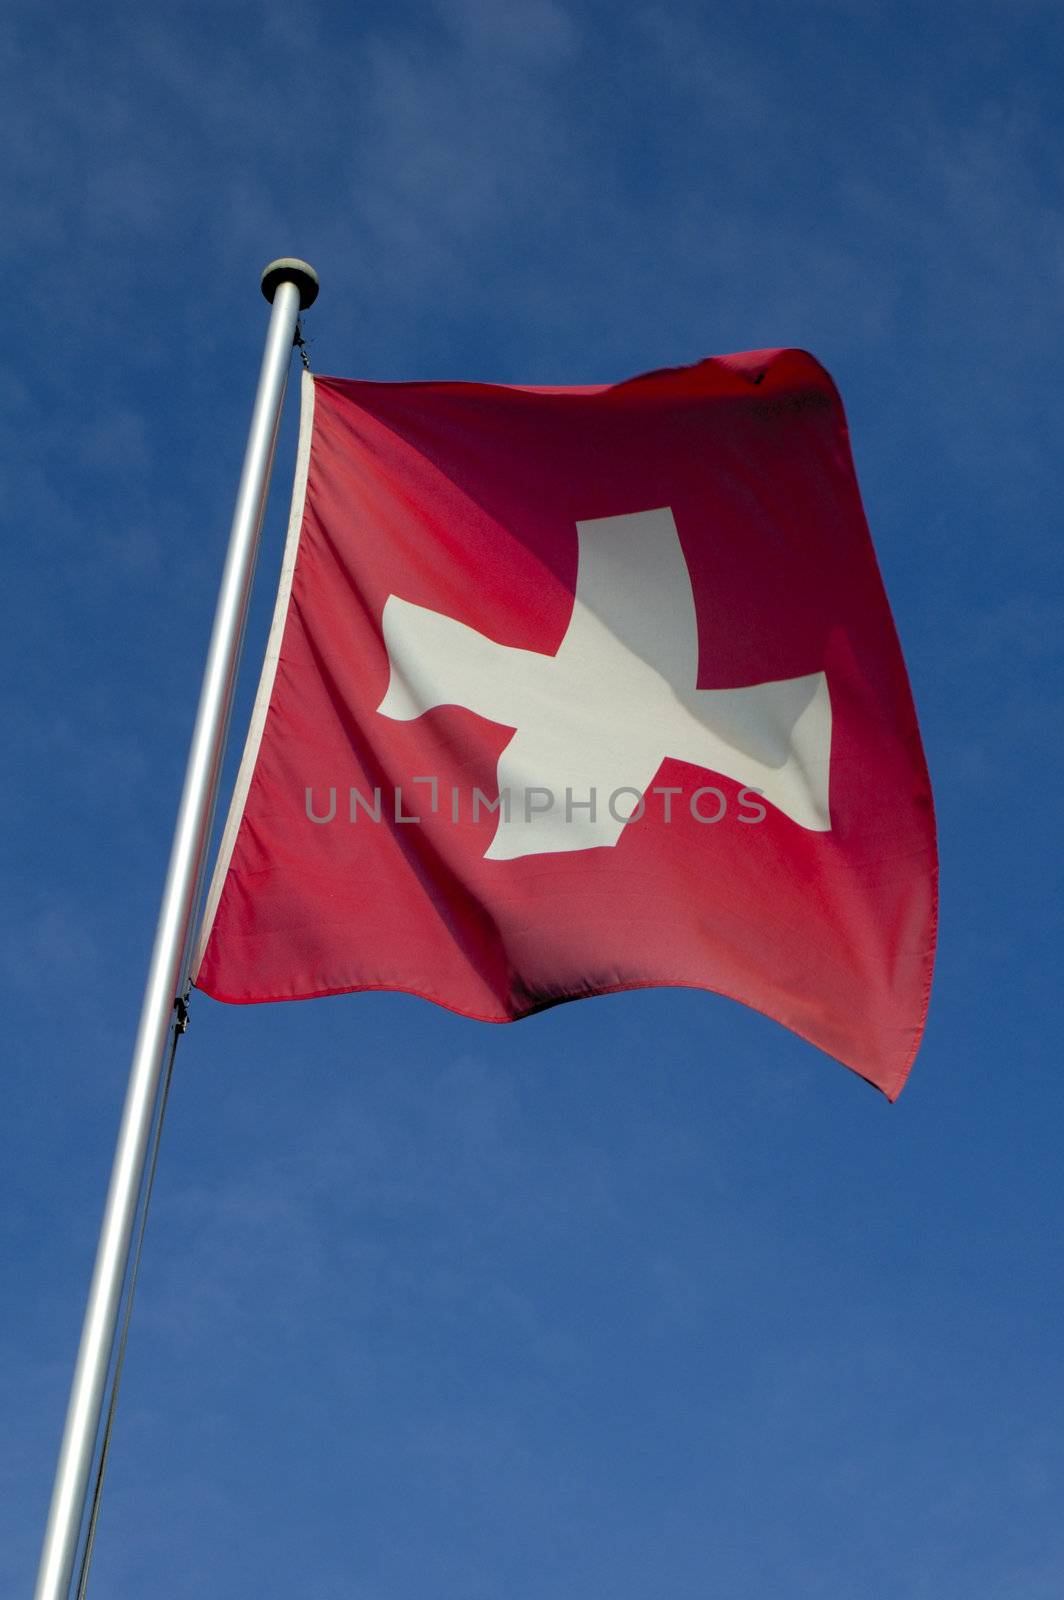 The flag of Switzerland flying against a blue sky.